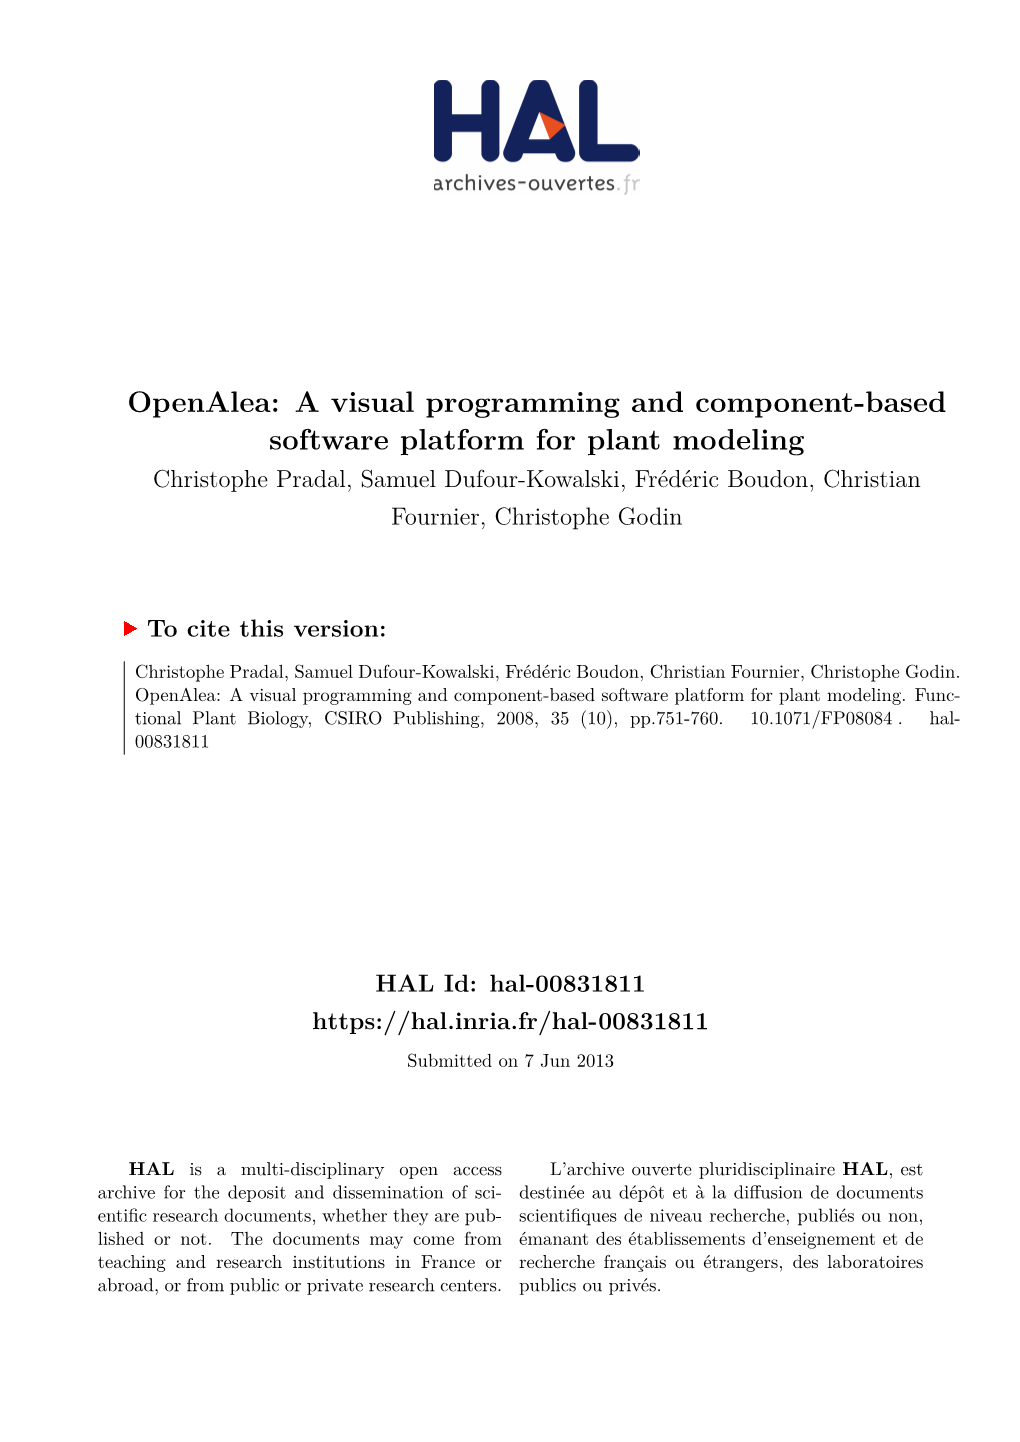 Openalea: a Visual Programming and Component-Based